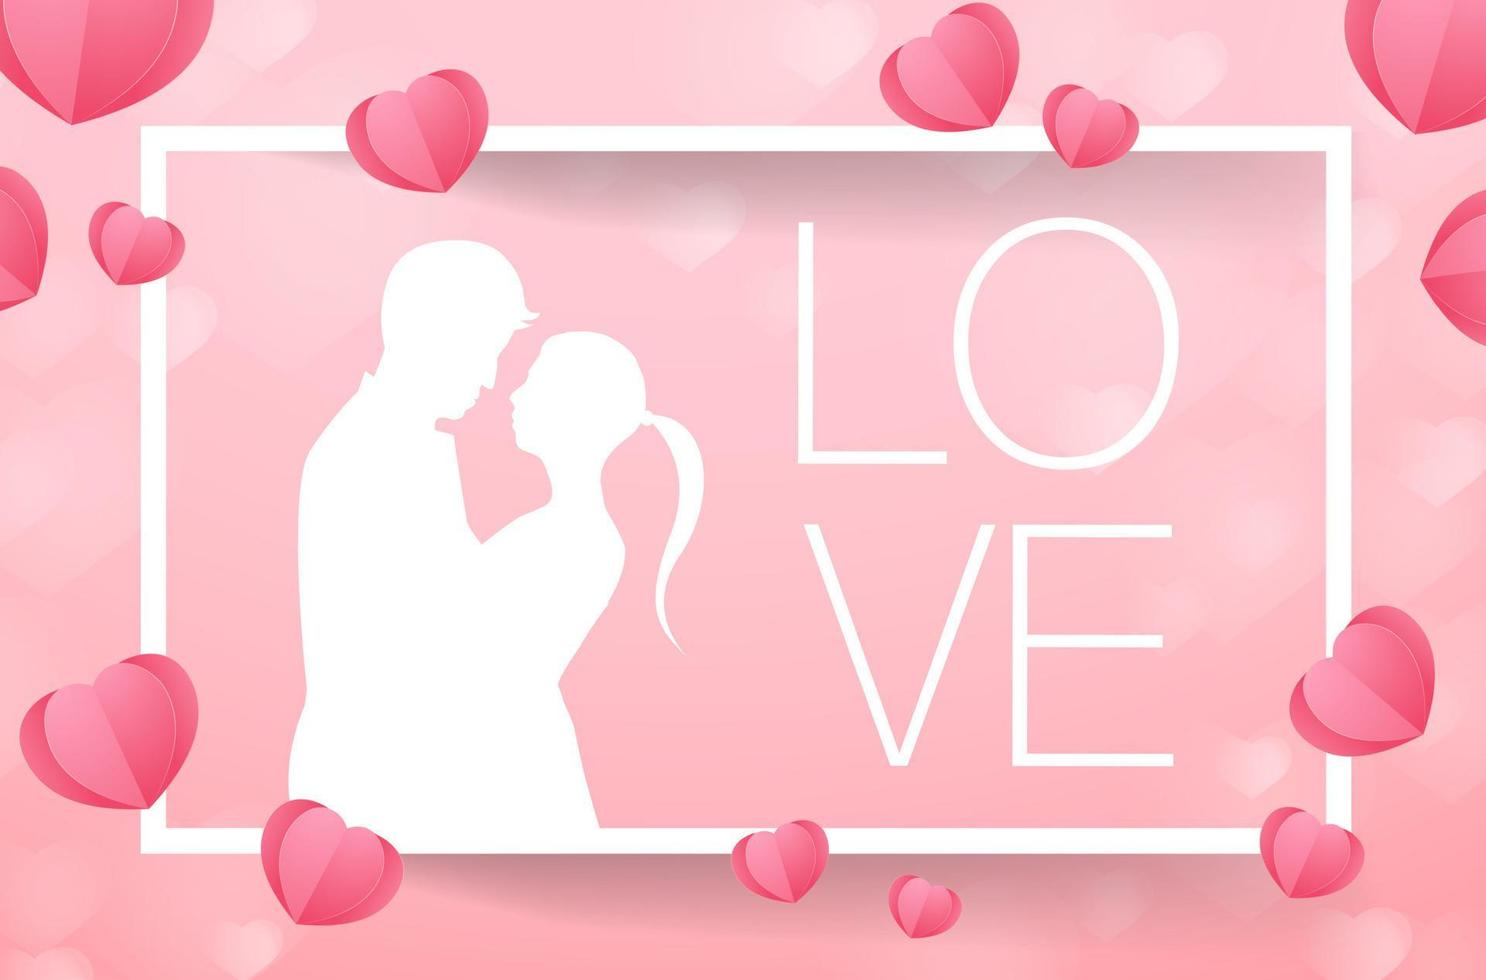 Love and Valentine day, Lovers stand and a paper art heart shape balloon floating in the sky. craft style. vector